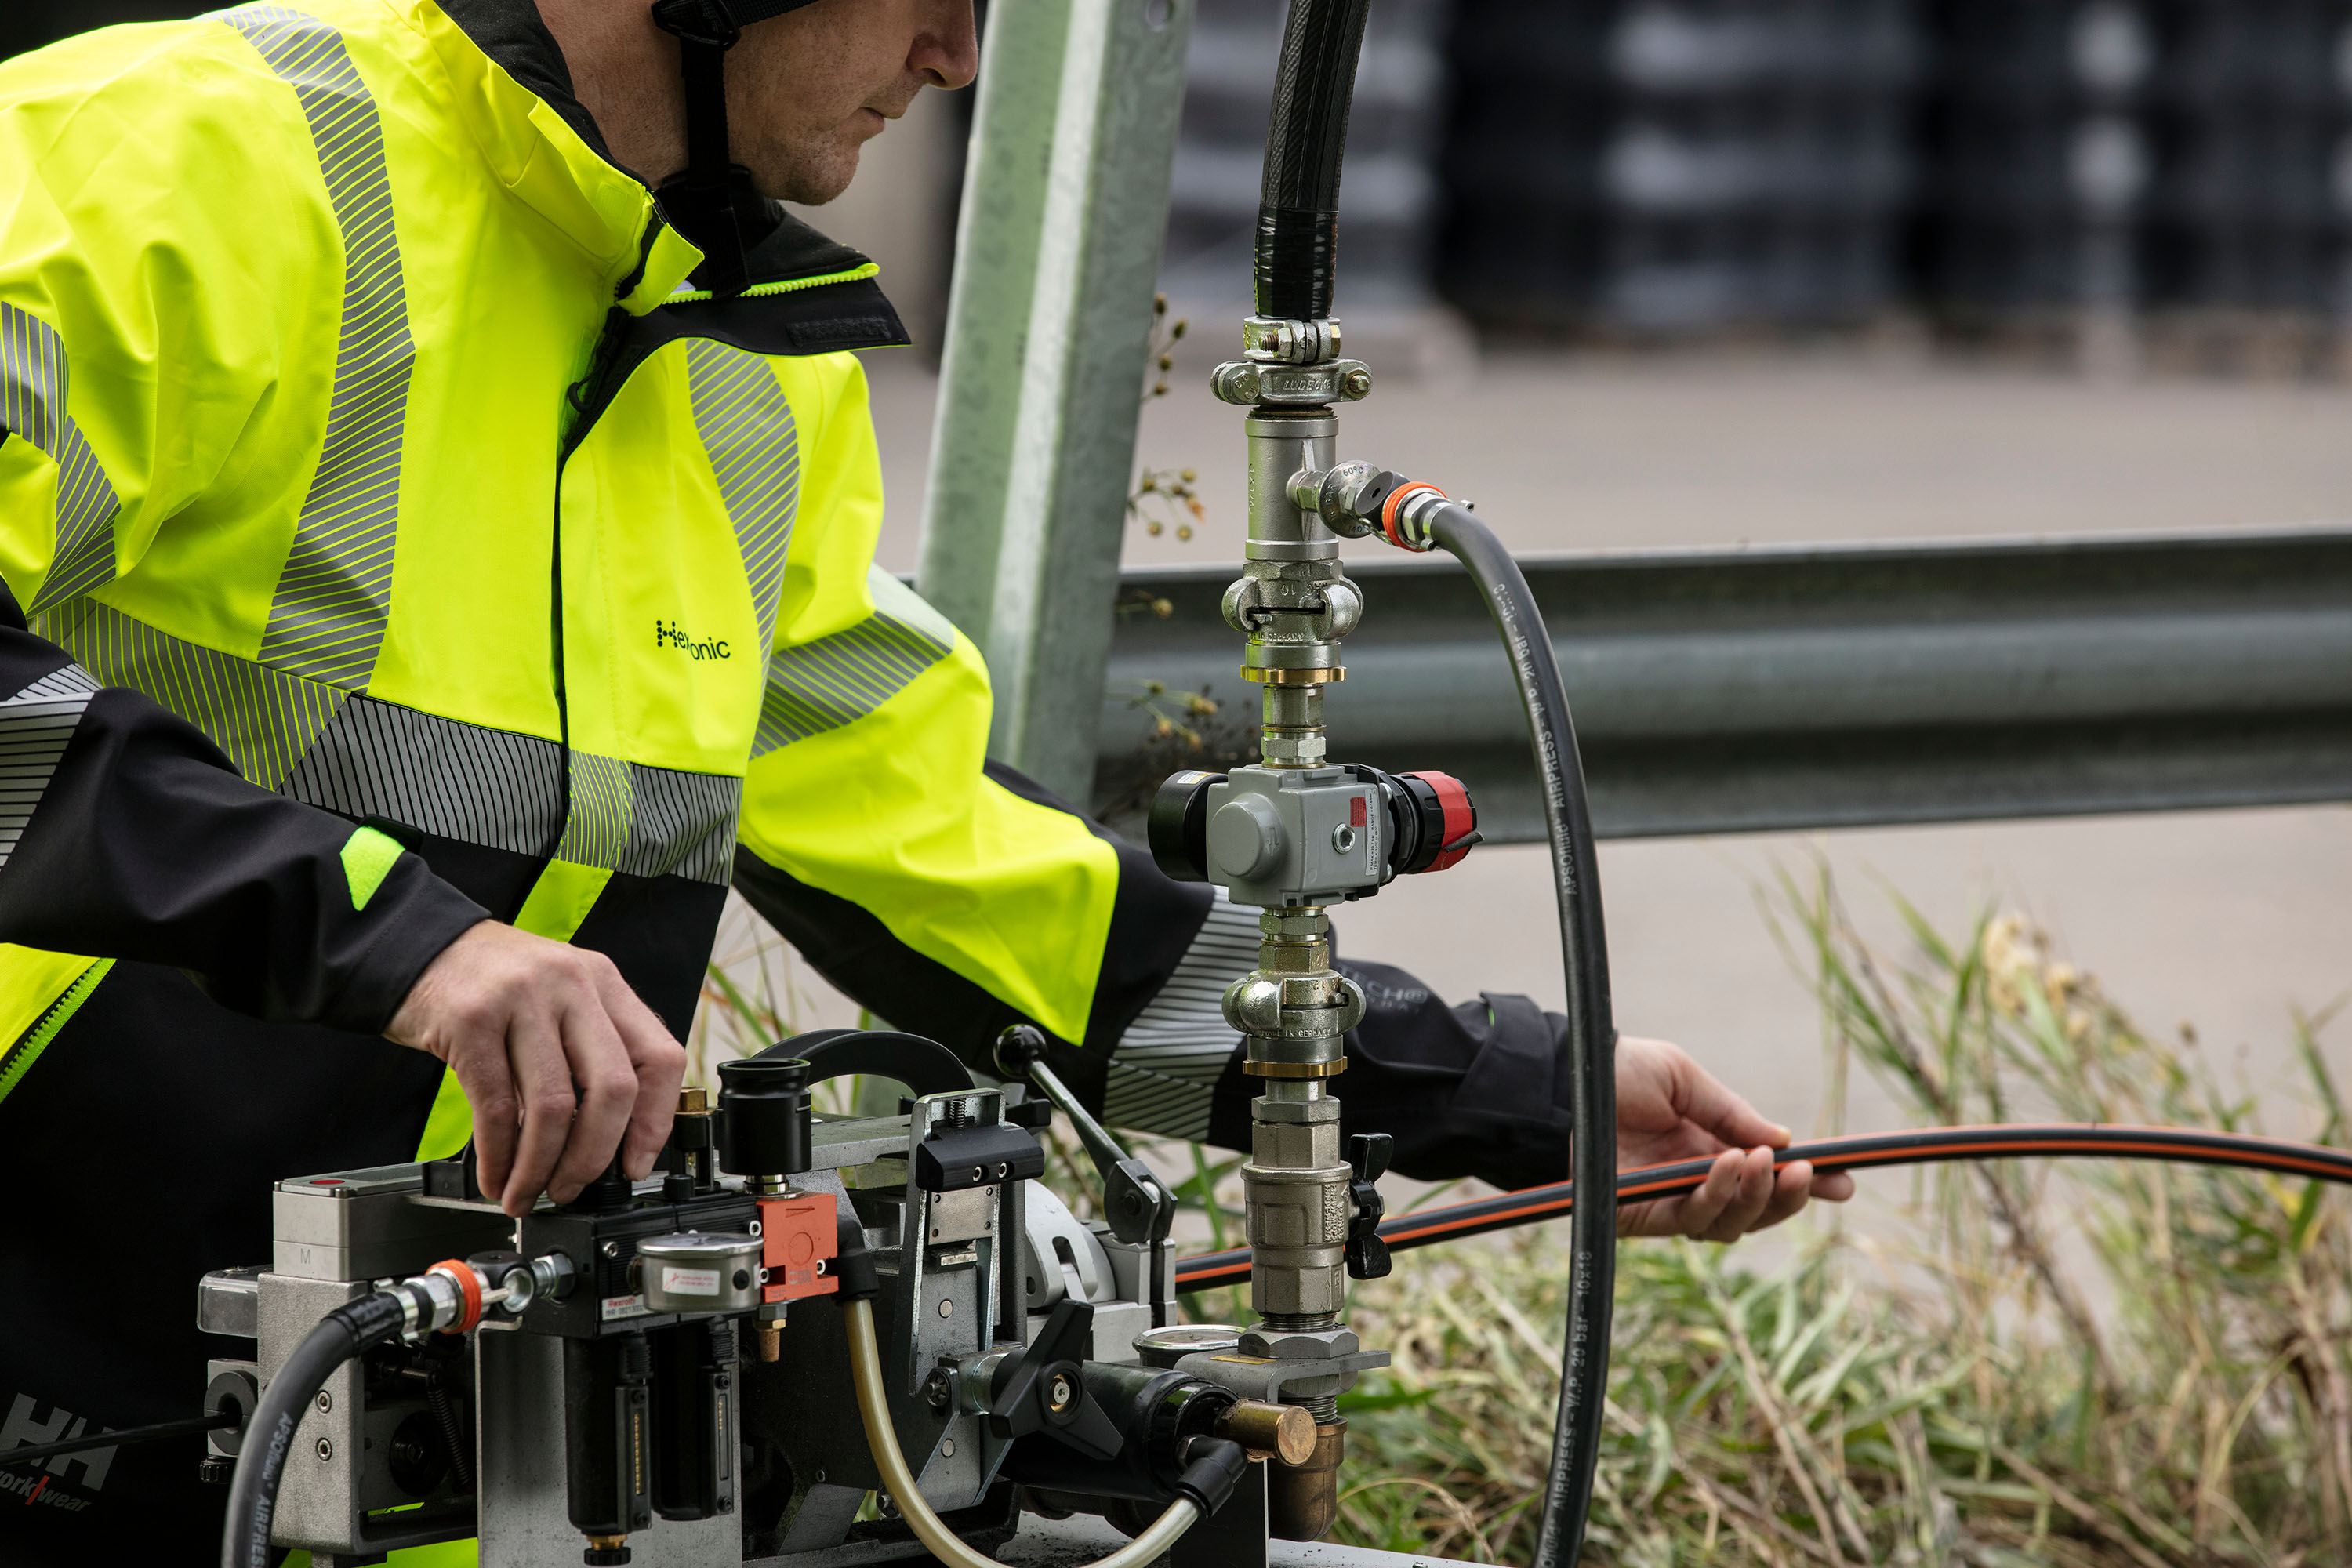 A person in a high-visibility jacket is outdoors, operating a fiber optic installation tool connected to a duct. It appears to be an industrial site.